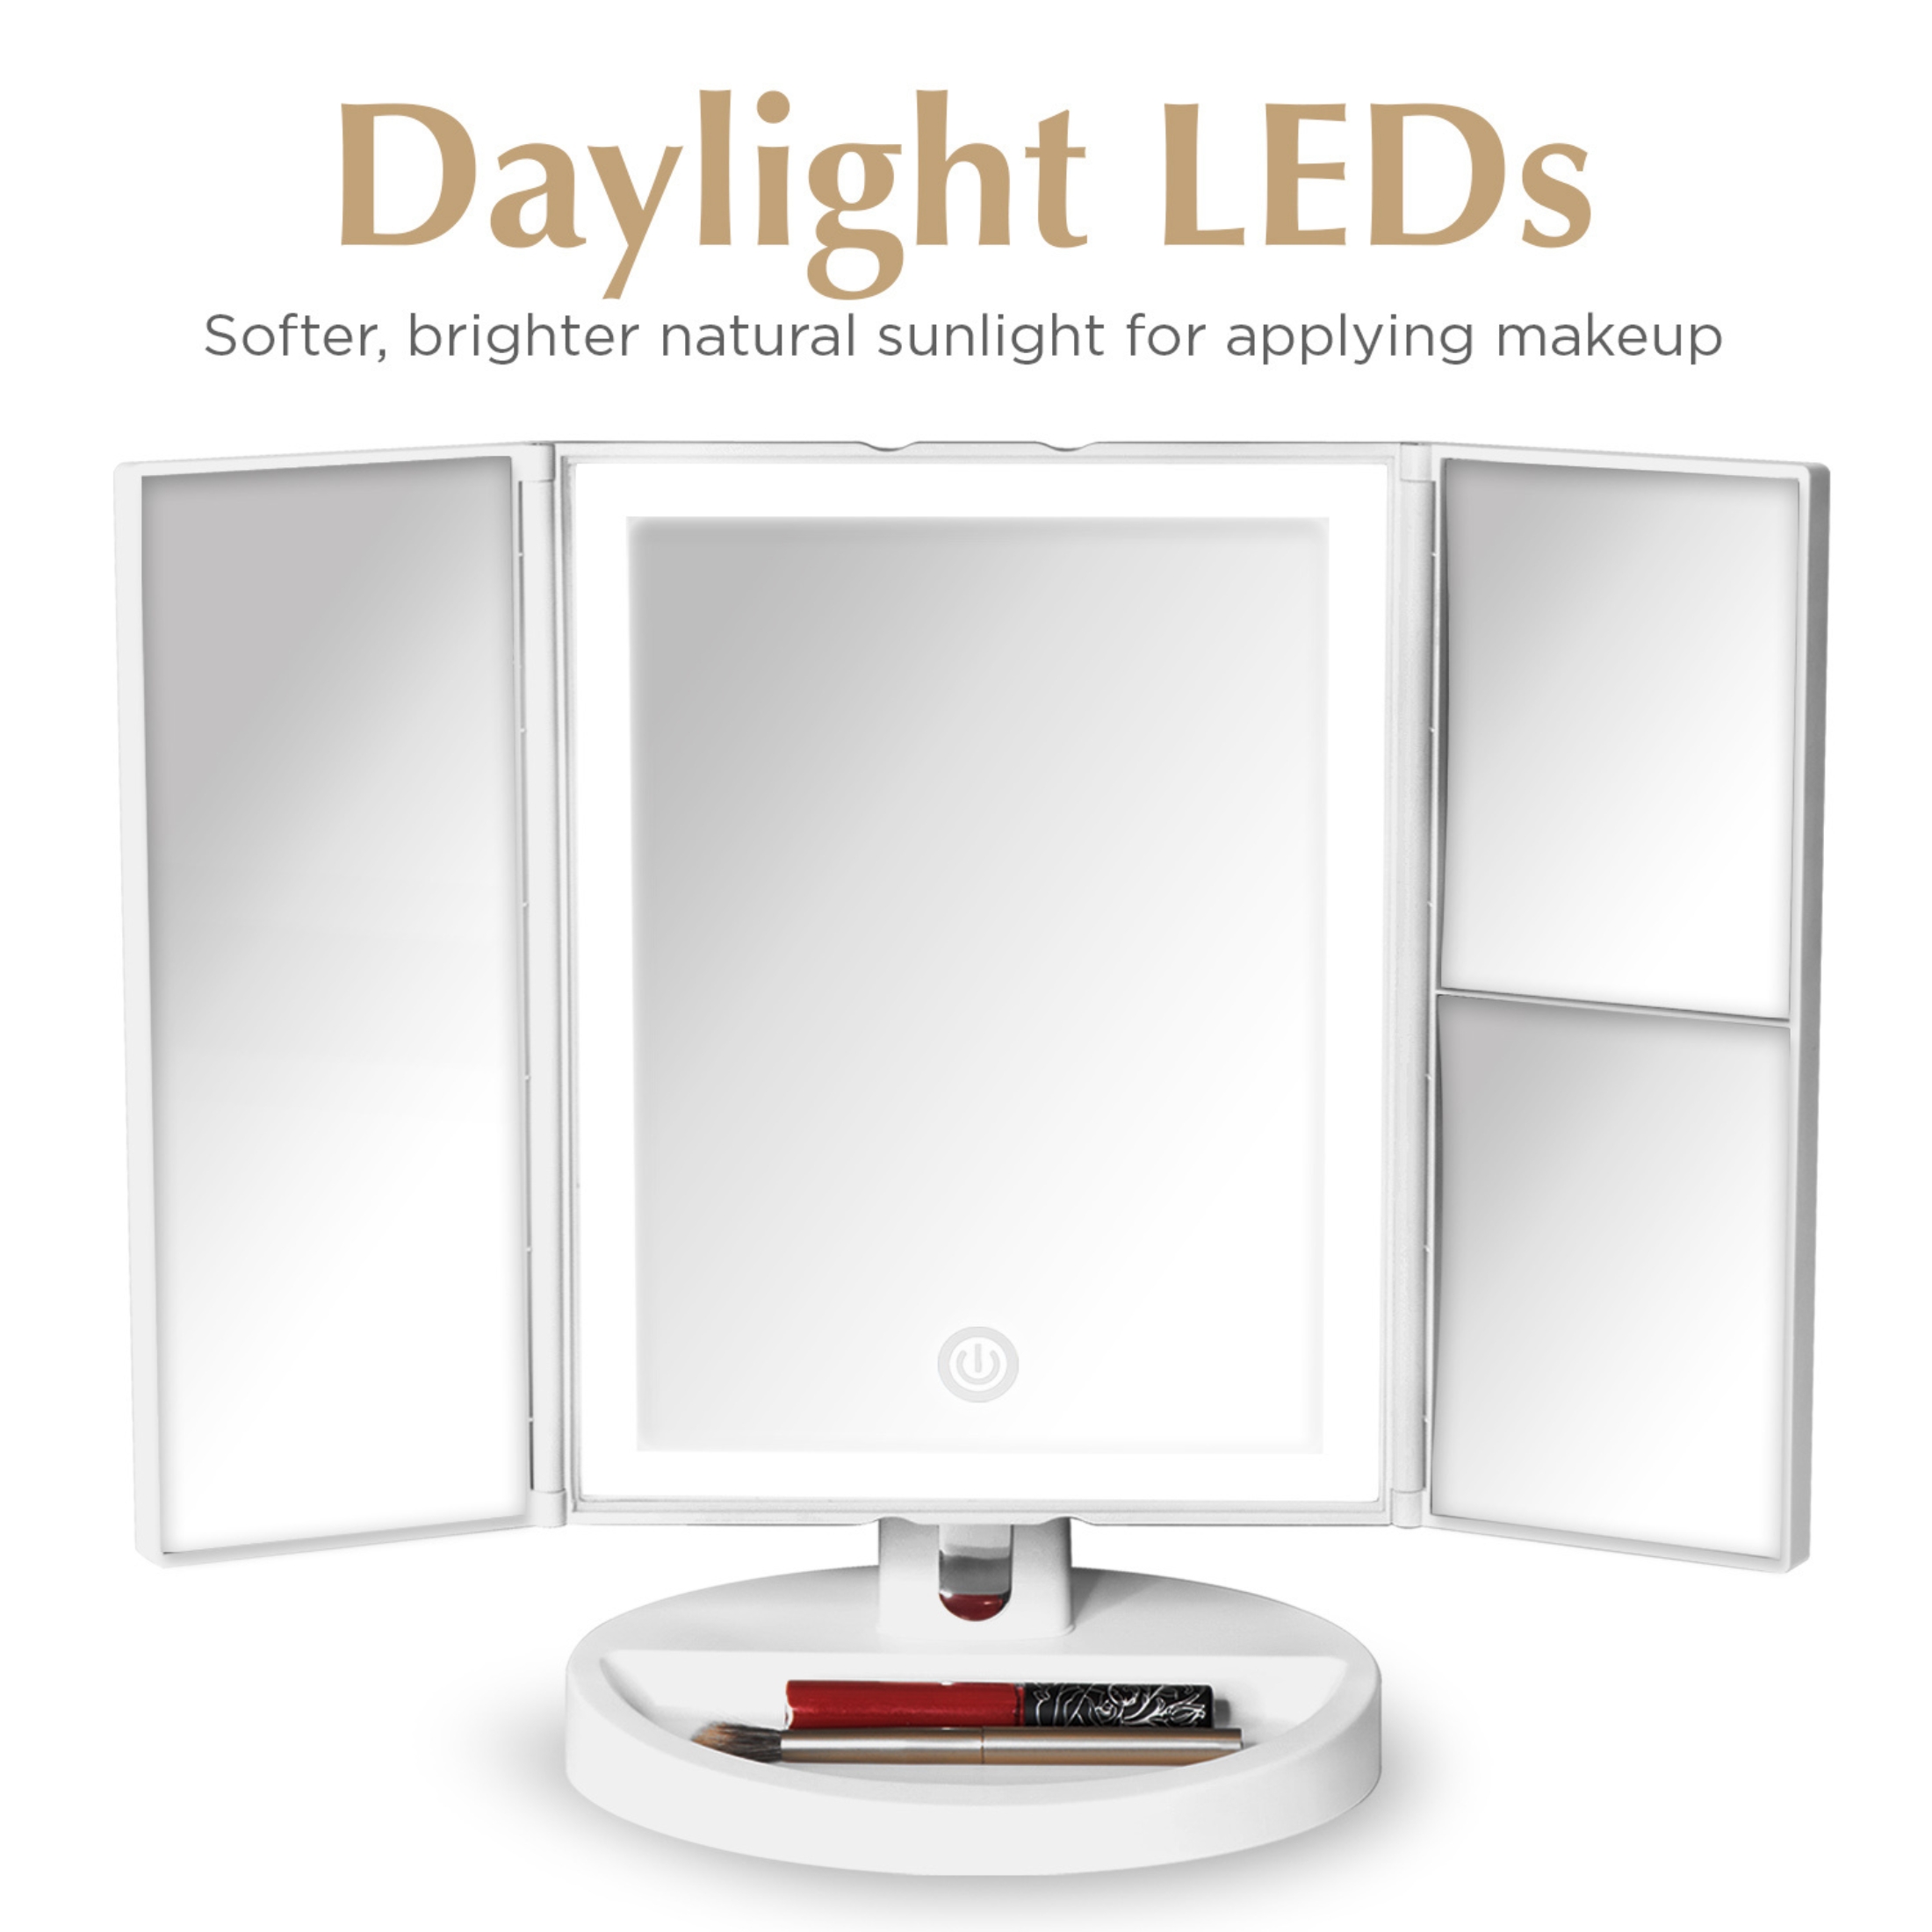 Fancii LED Lighted Vanity Makeup Mirror, Trifold Mirror with 5x and 10x Magnifications - 34 Dimmable Natural Lights, Touch Screen, Best Adjustable Countertop Mirror with Cosmetic Stand (Tria) - image 4 of 7